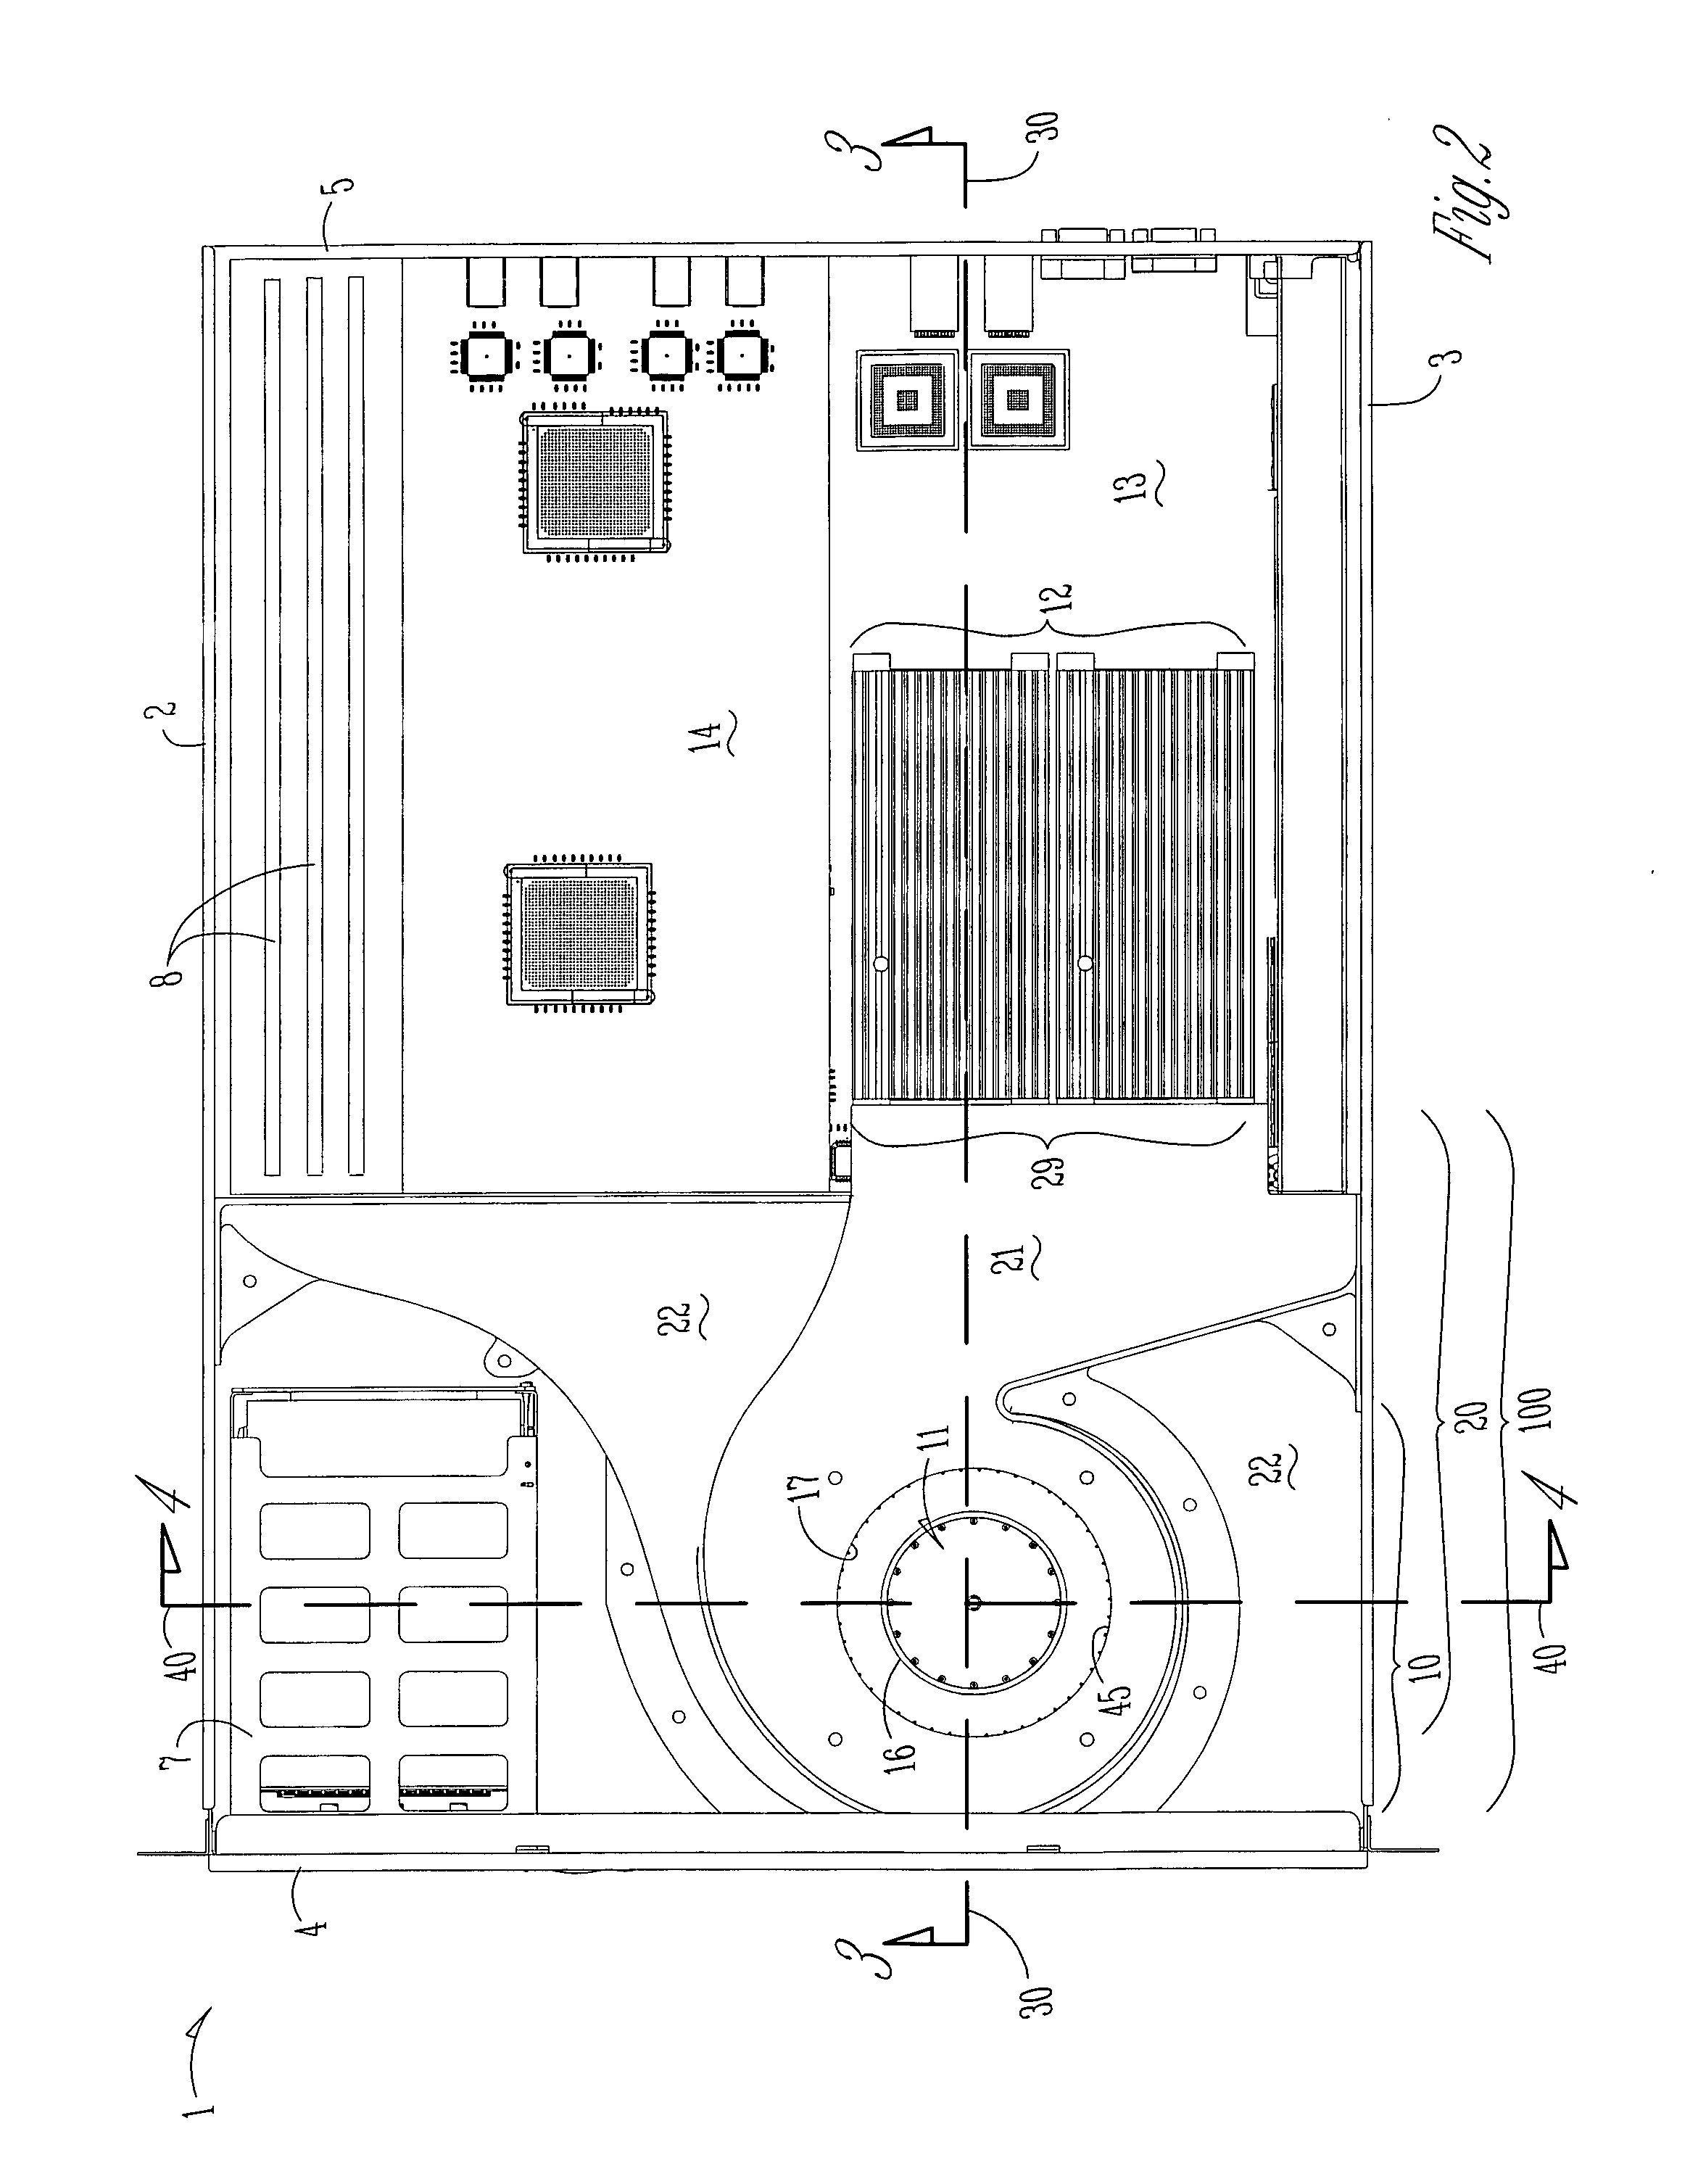 High capacity air-cooling systems for electronic apparatus